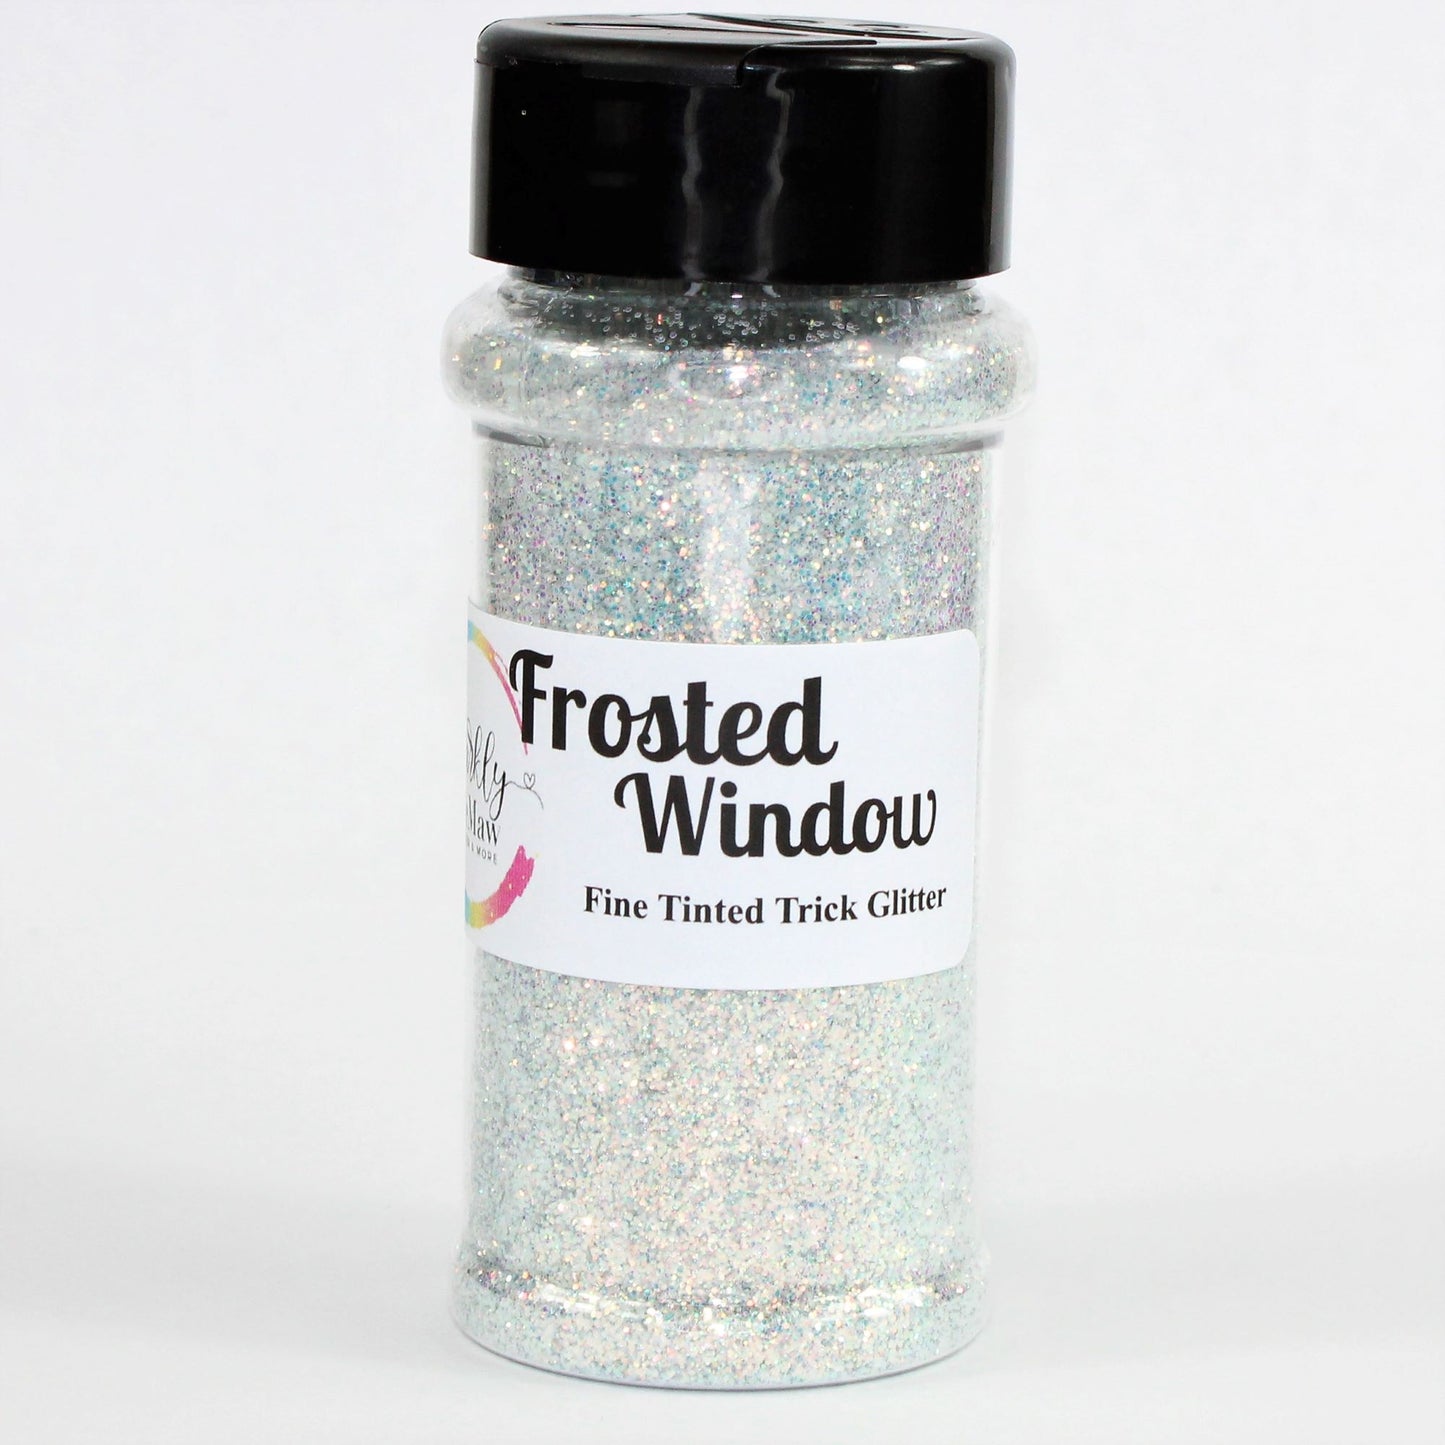 Frosted Window Fine Tinted High Sparkle Trick Glitter